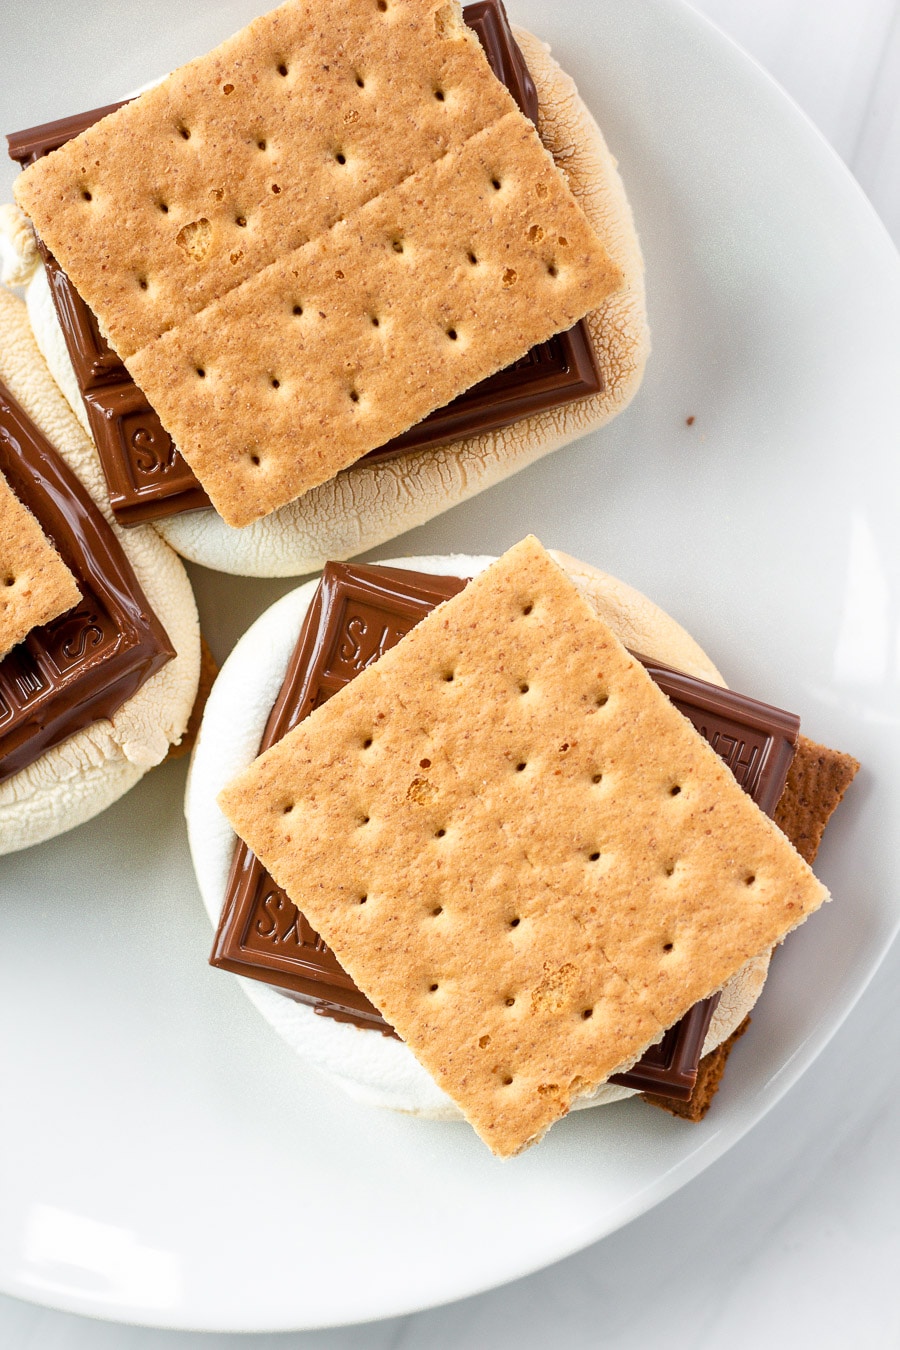 How to Make Air Fryer S'Mores - Indoor S'mores Recipe! - bits and bites